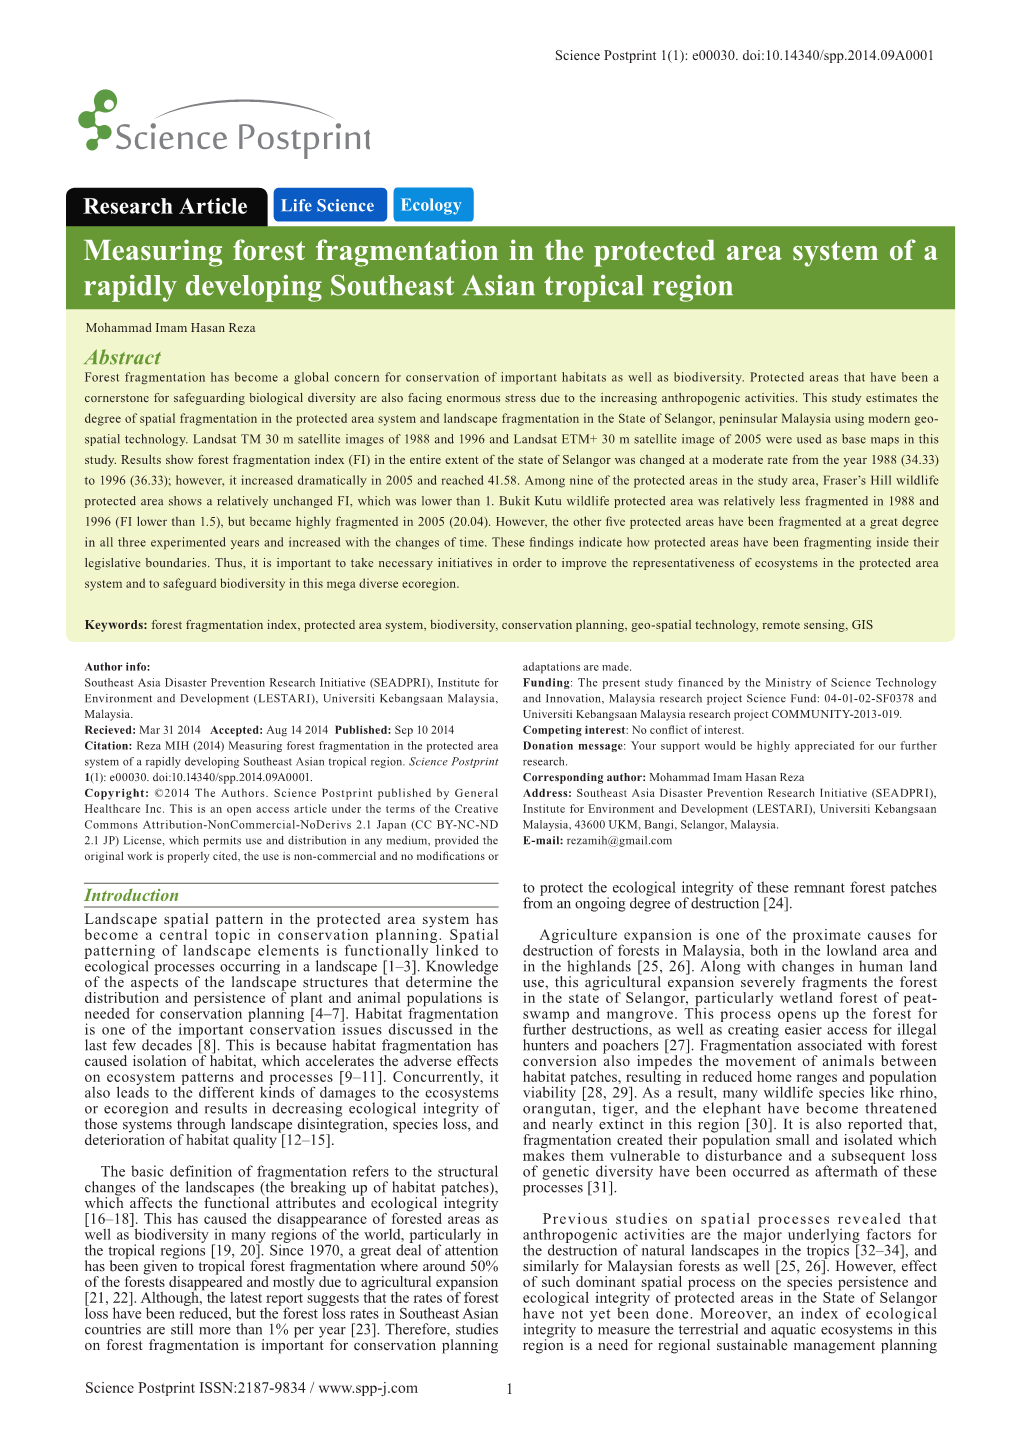 Measuring Forest Fragmentation in the Protected Area System of a Rapidly Developing Southeast Asian Tropical Region